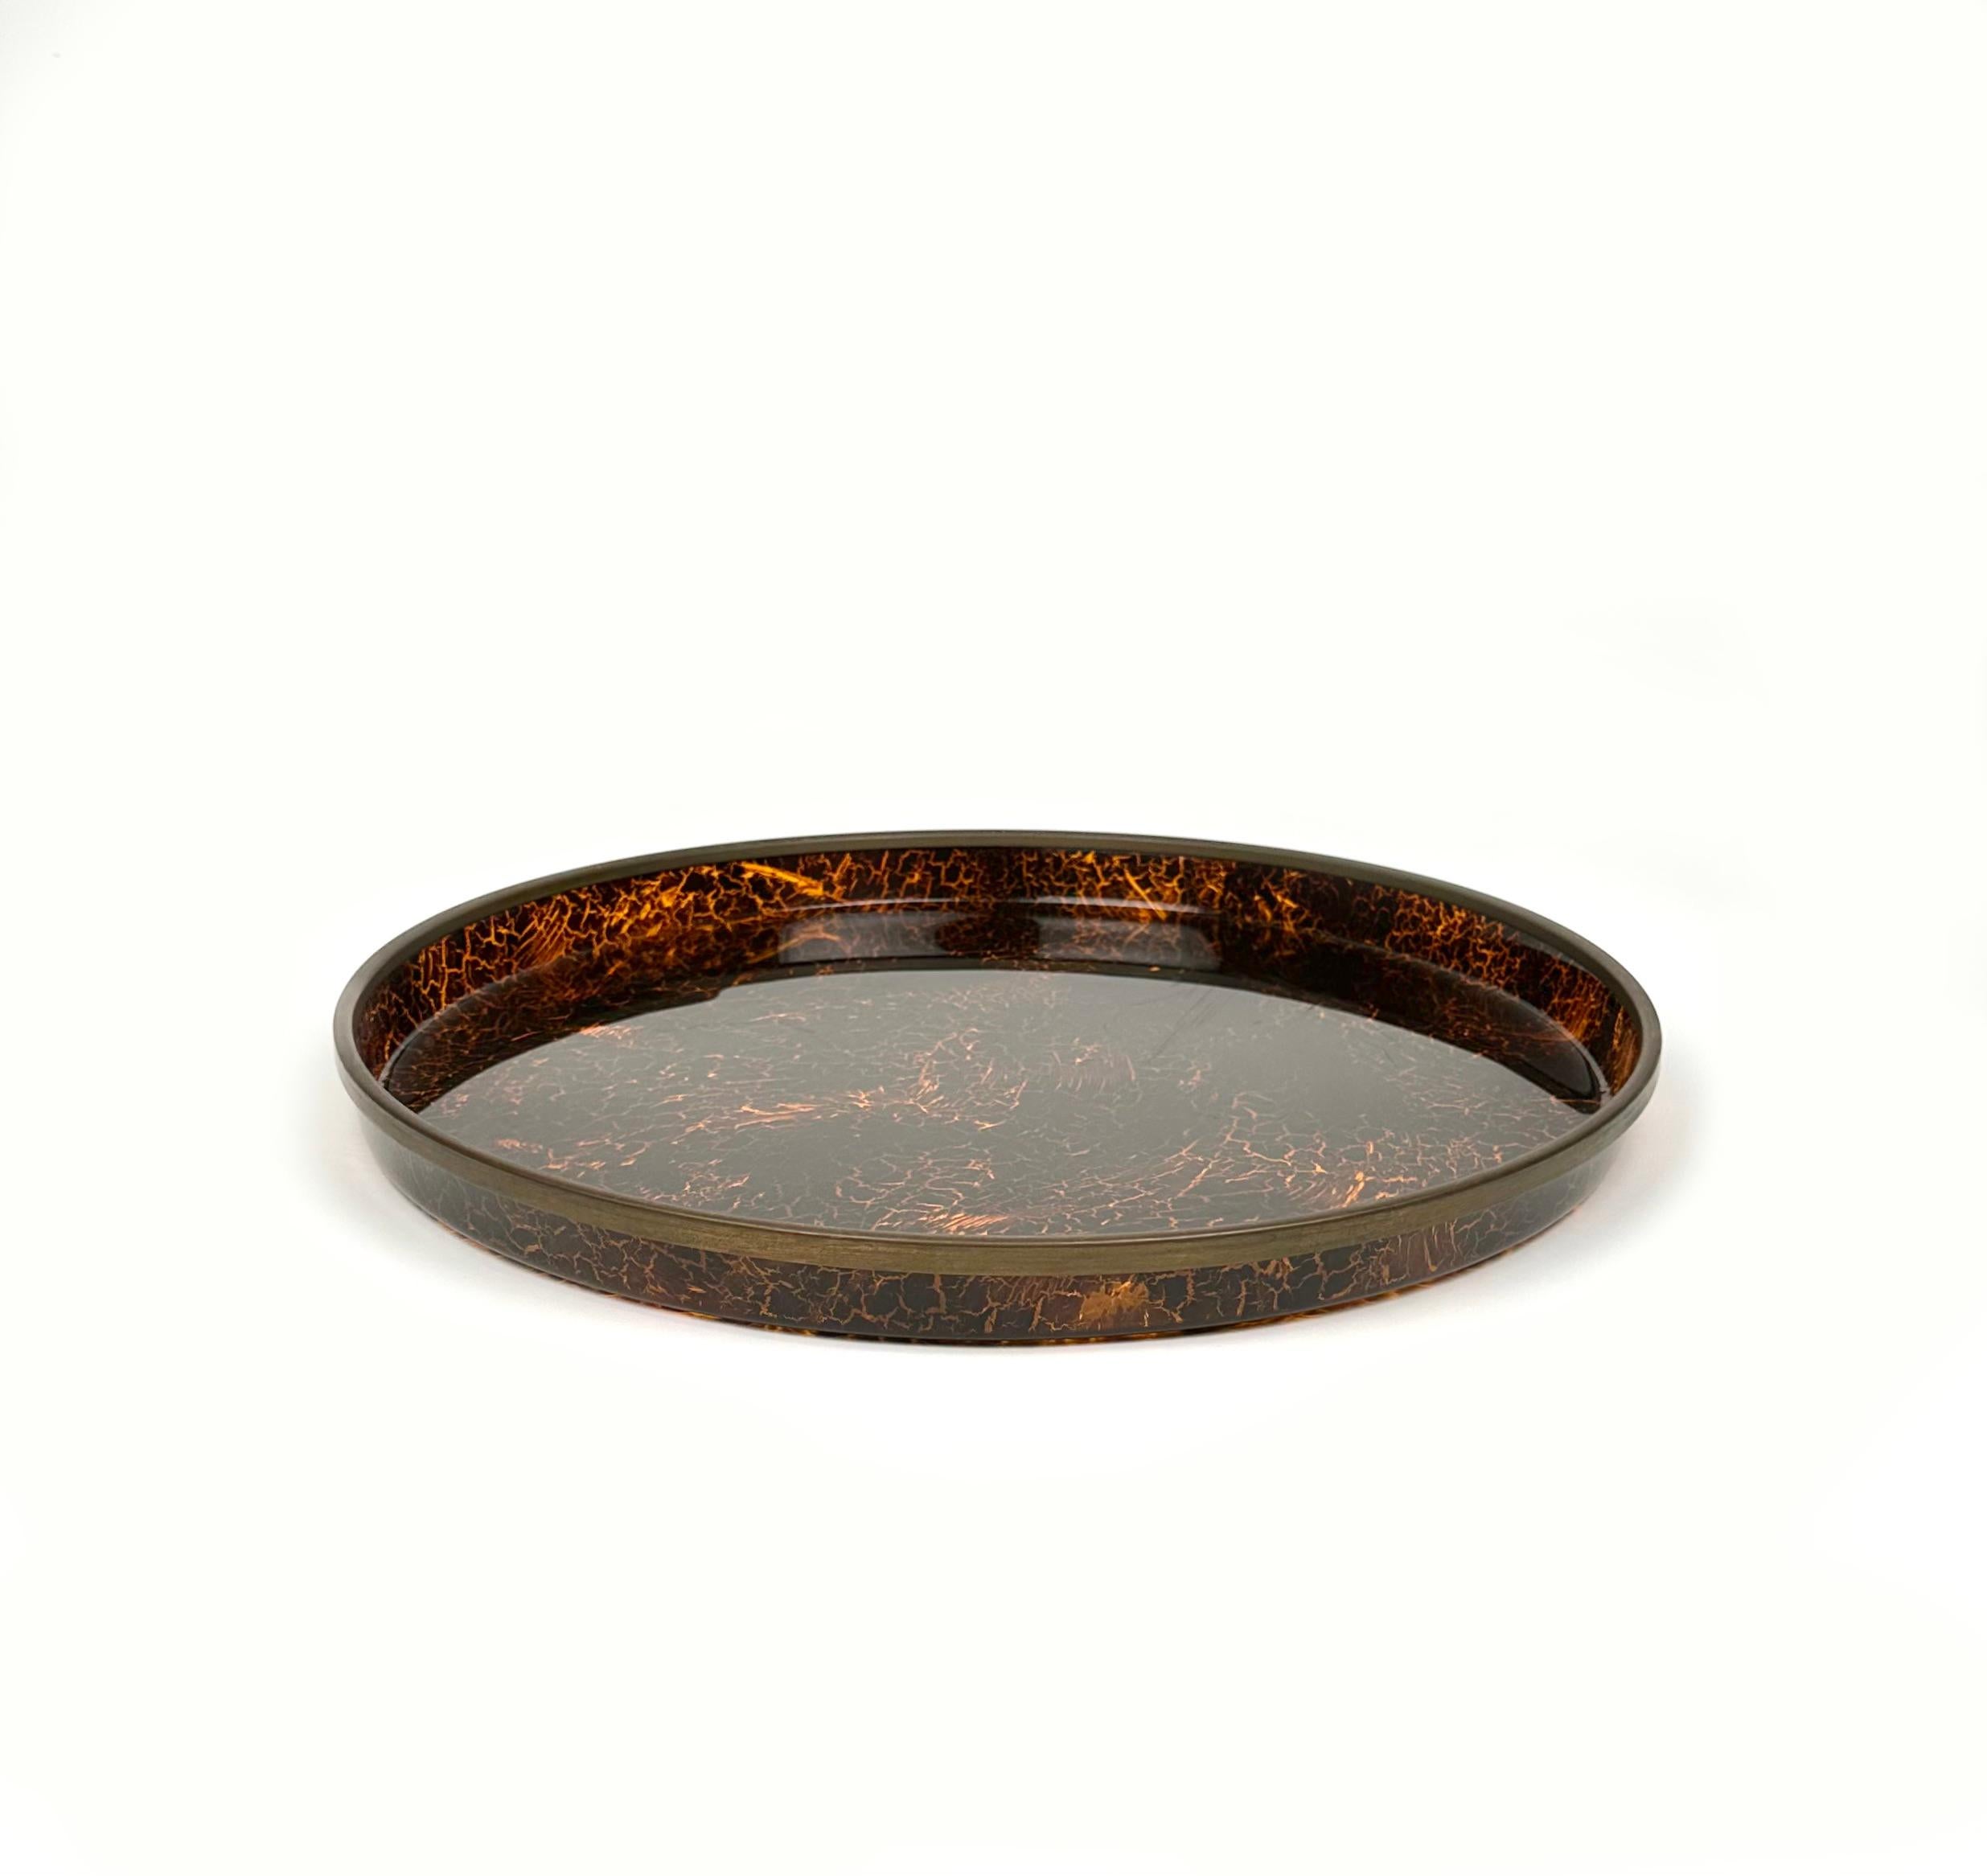 Mid-Century Modern Round Centerpiece Serving Tray Lucite Faux Tortoiseshell and Brass, Italy 1970s For Sale